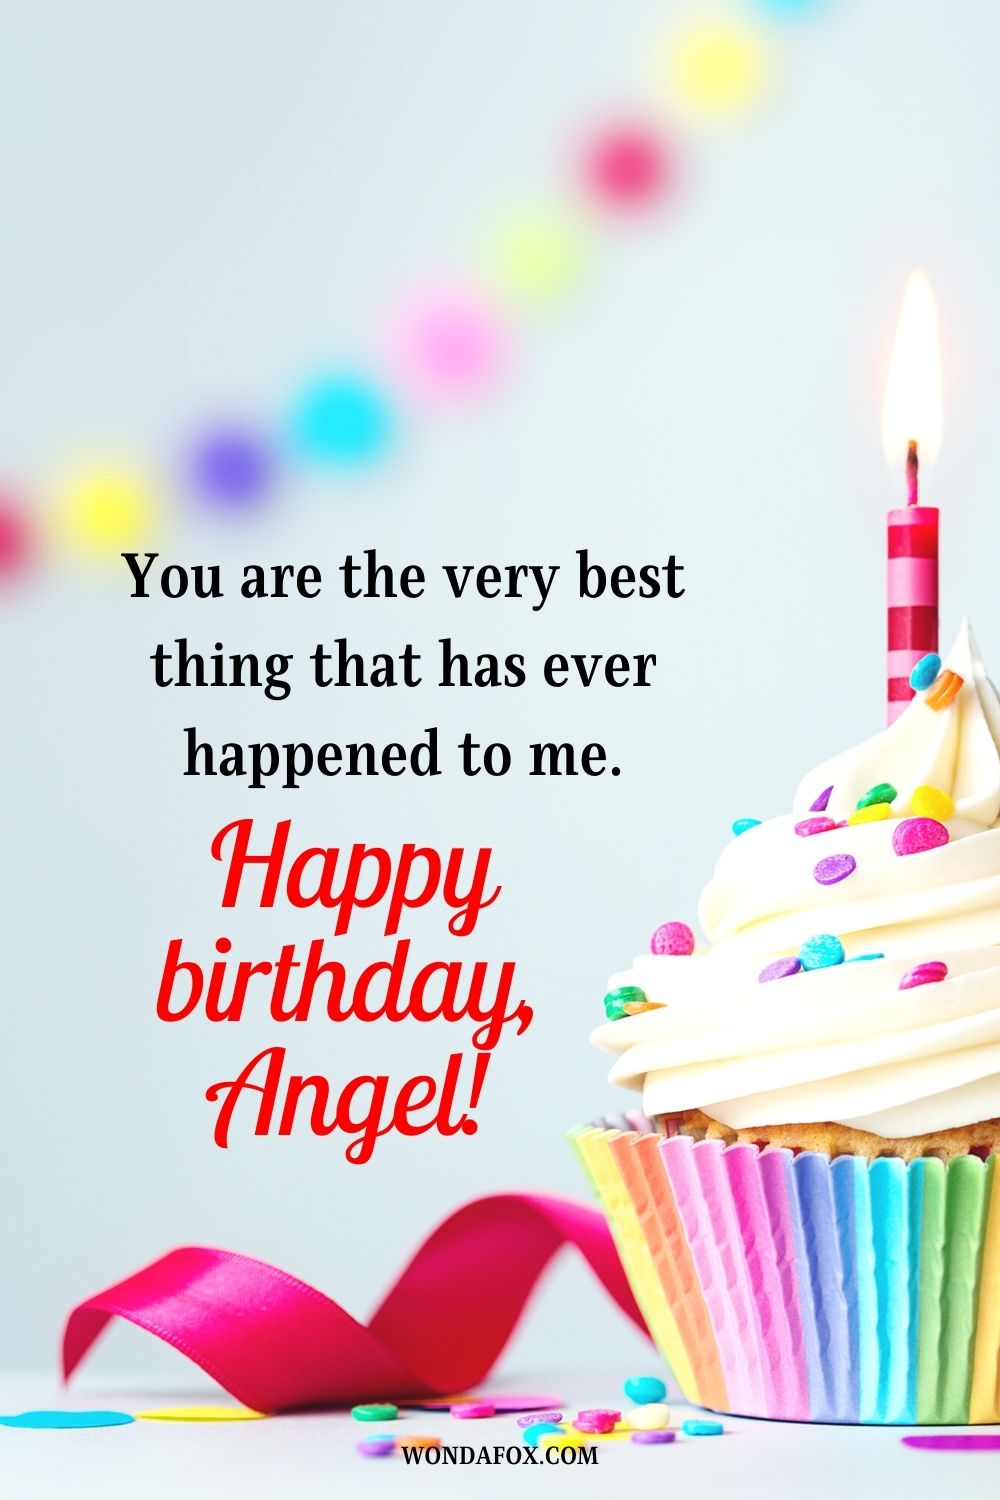 You are the very best thing that has ever happened to me. Happy birthday angel!